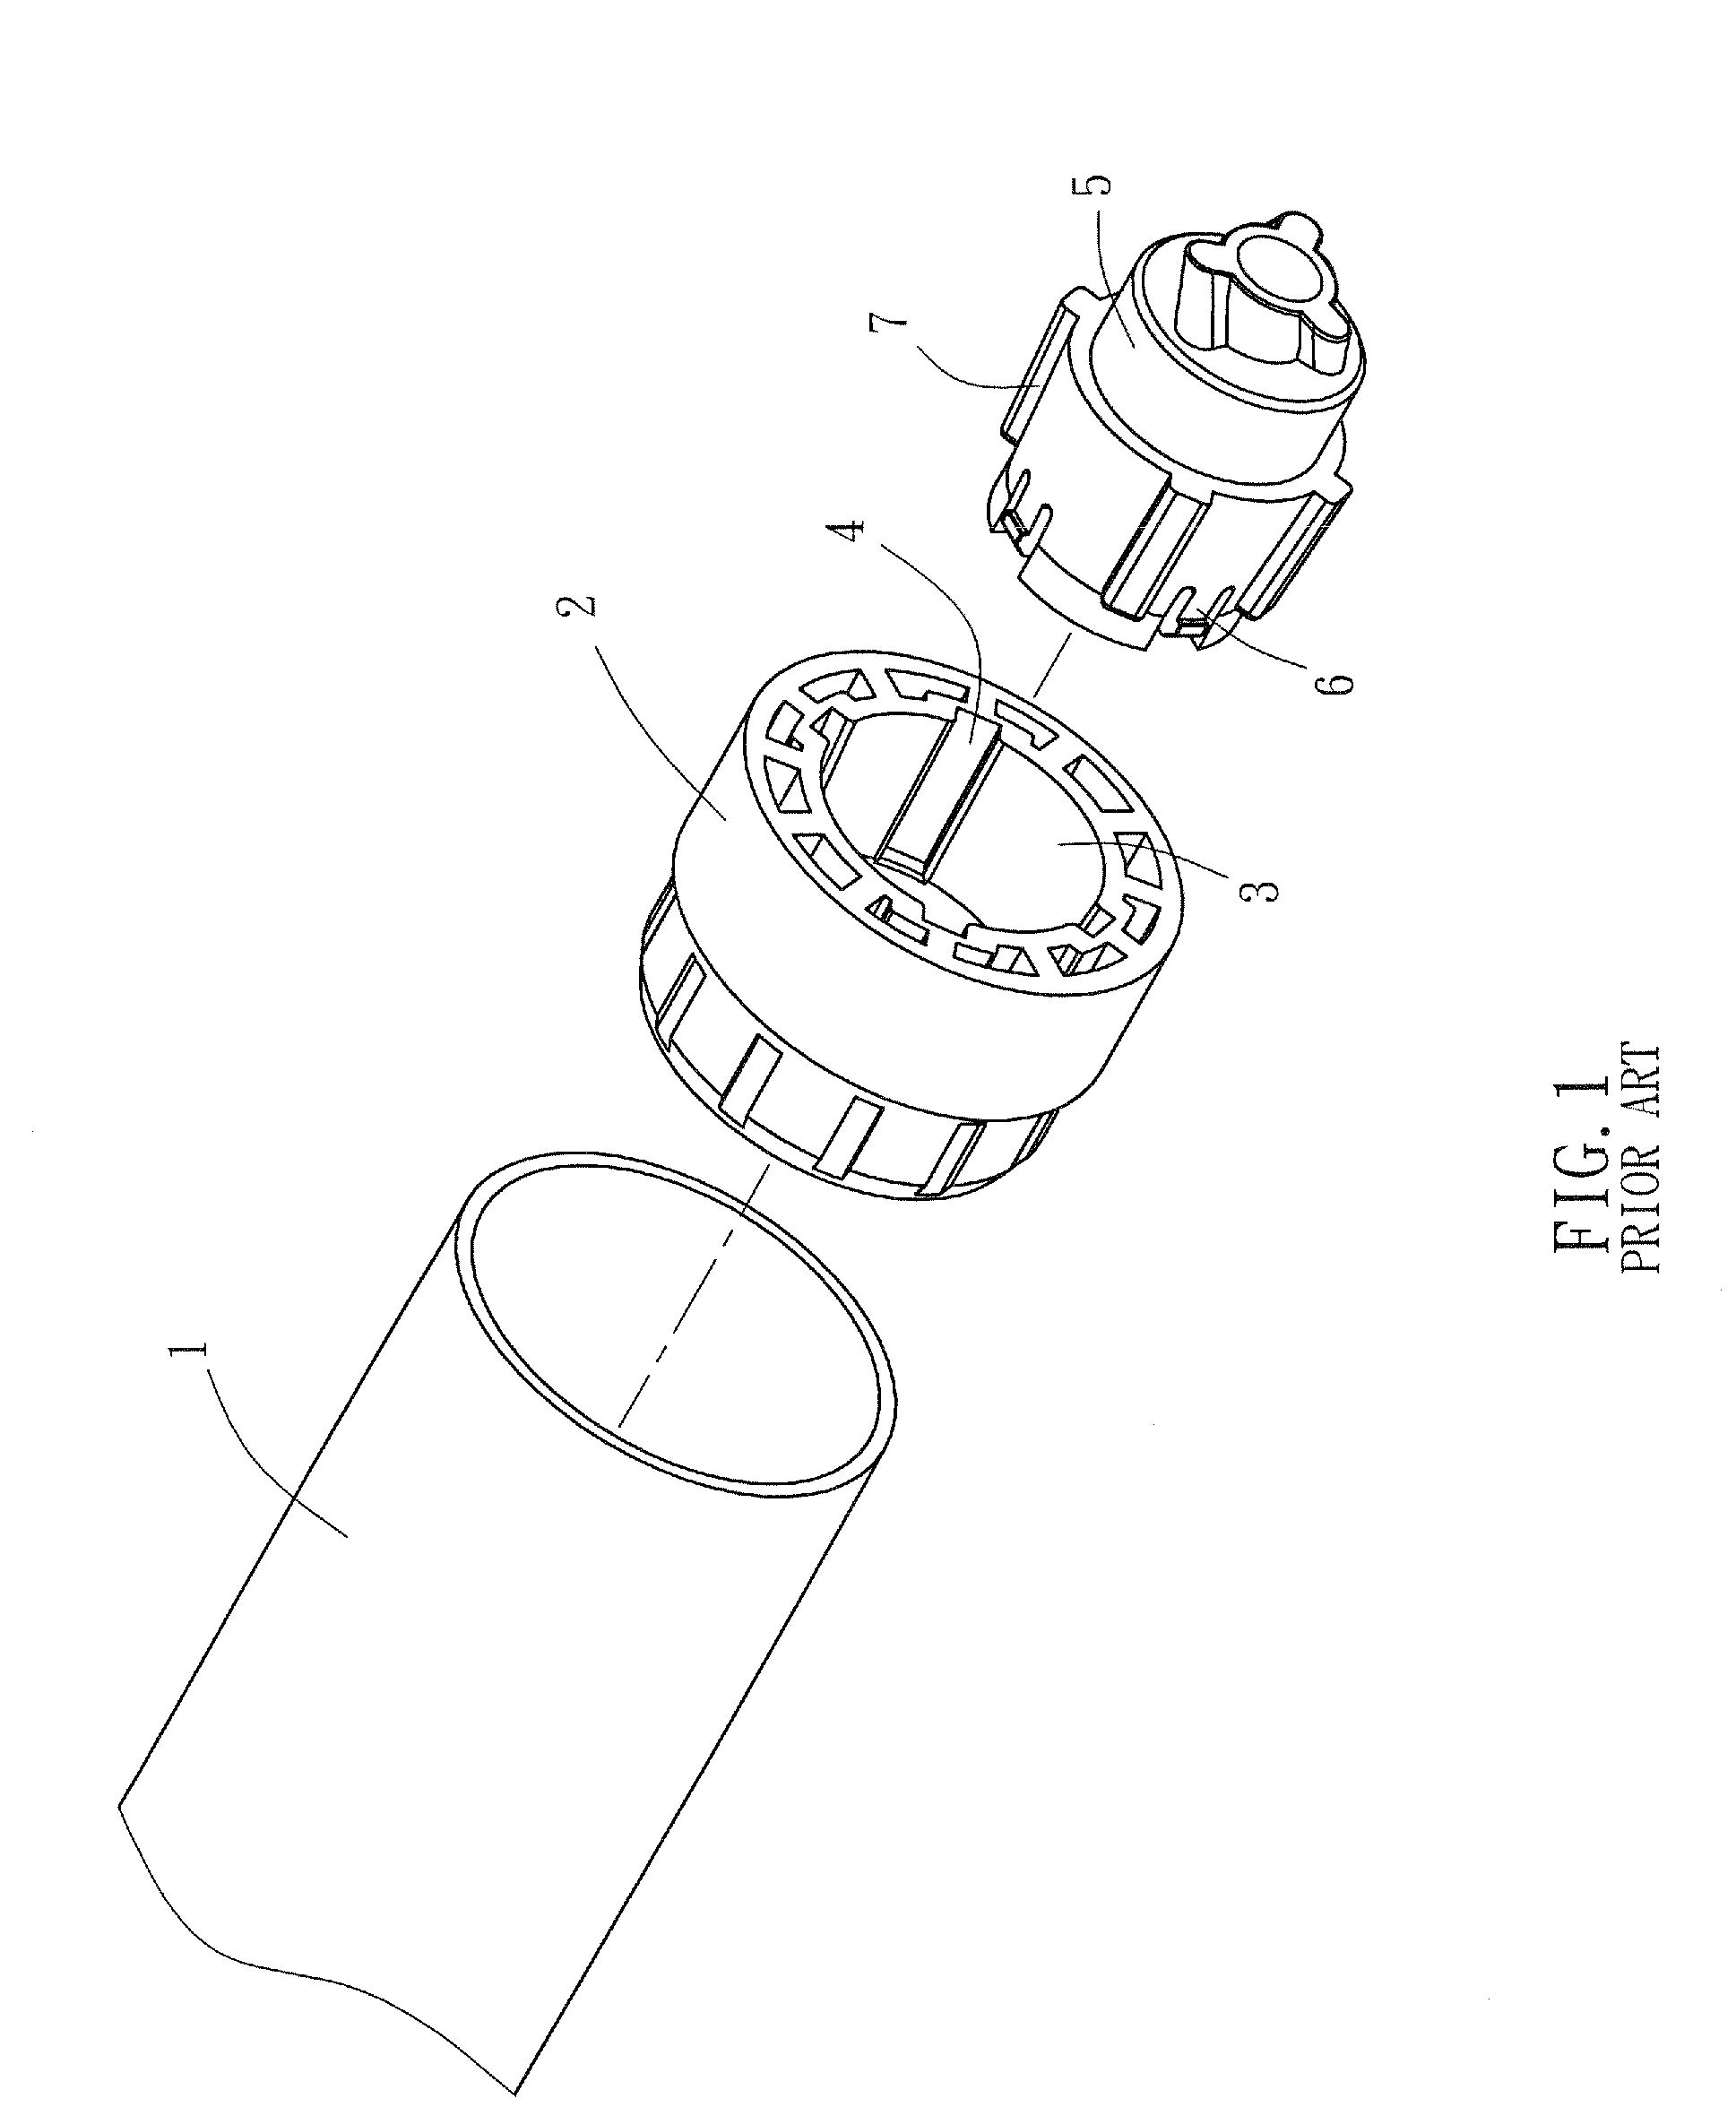 Supporting apparatus for a photosensitive drum